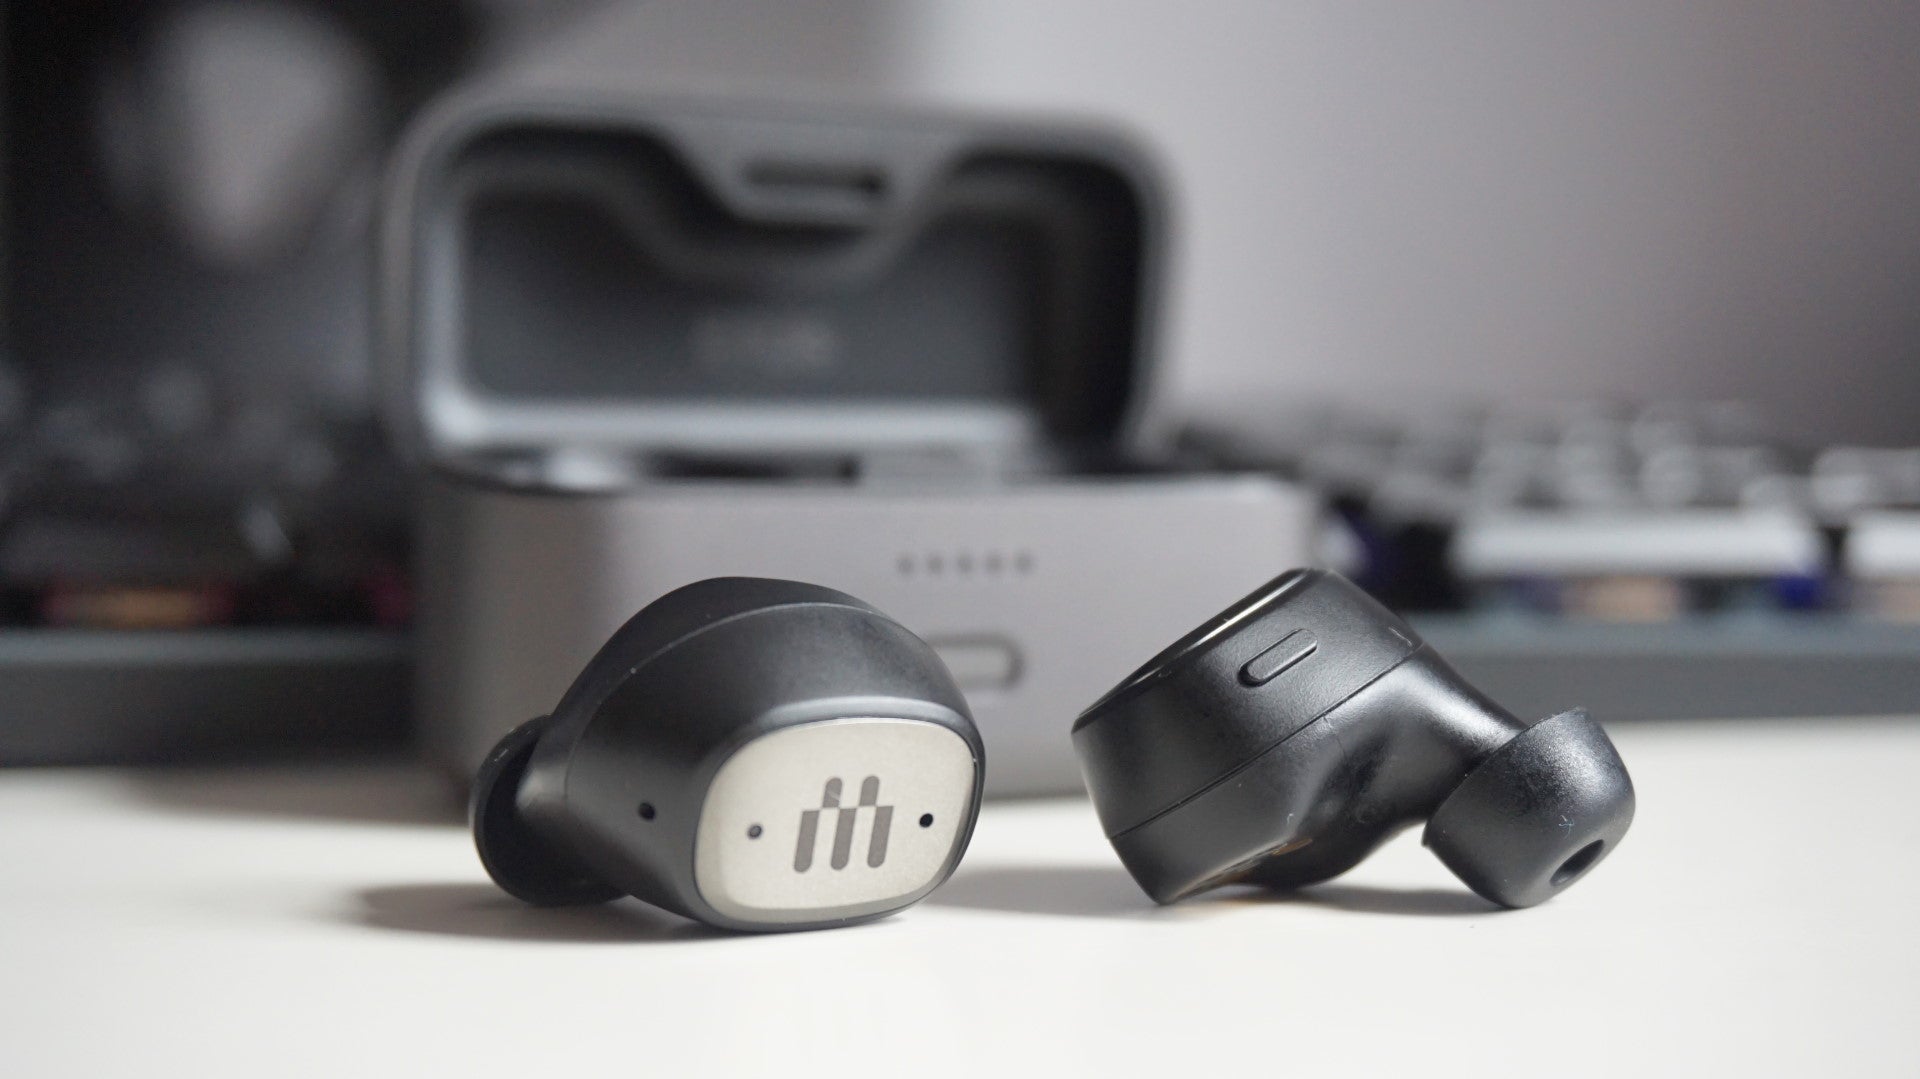 A photo of the EPOS GTW 270 Hybrid wireless earbuds in front of their charging case